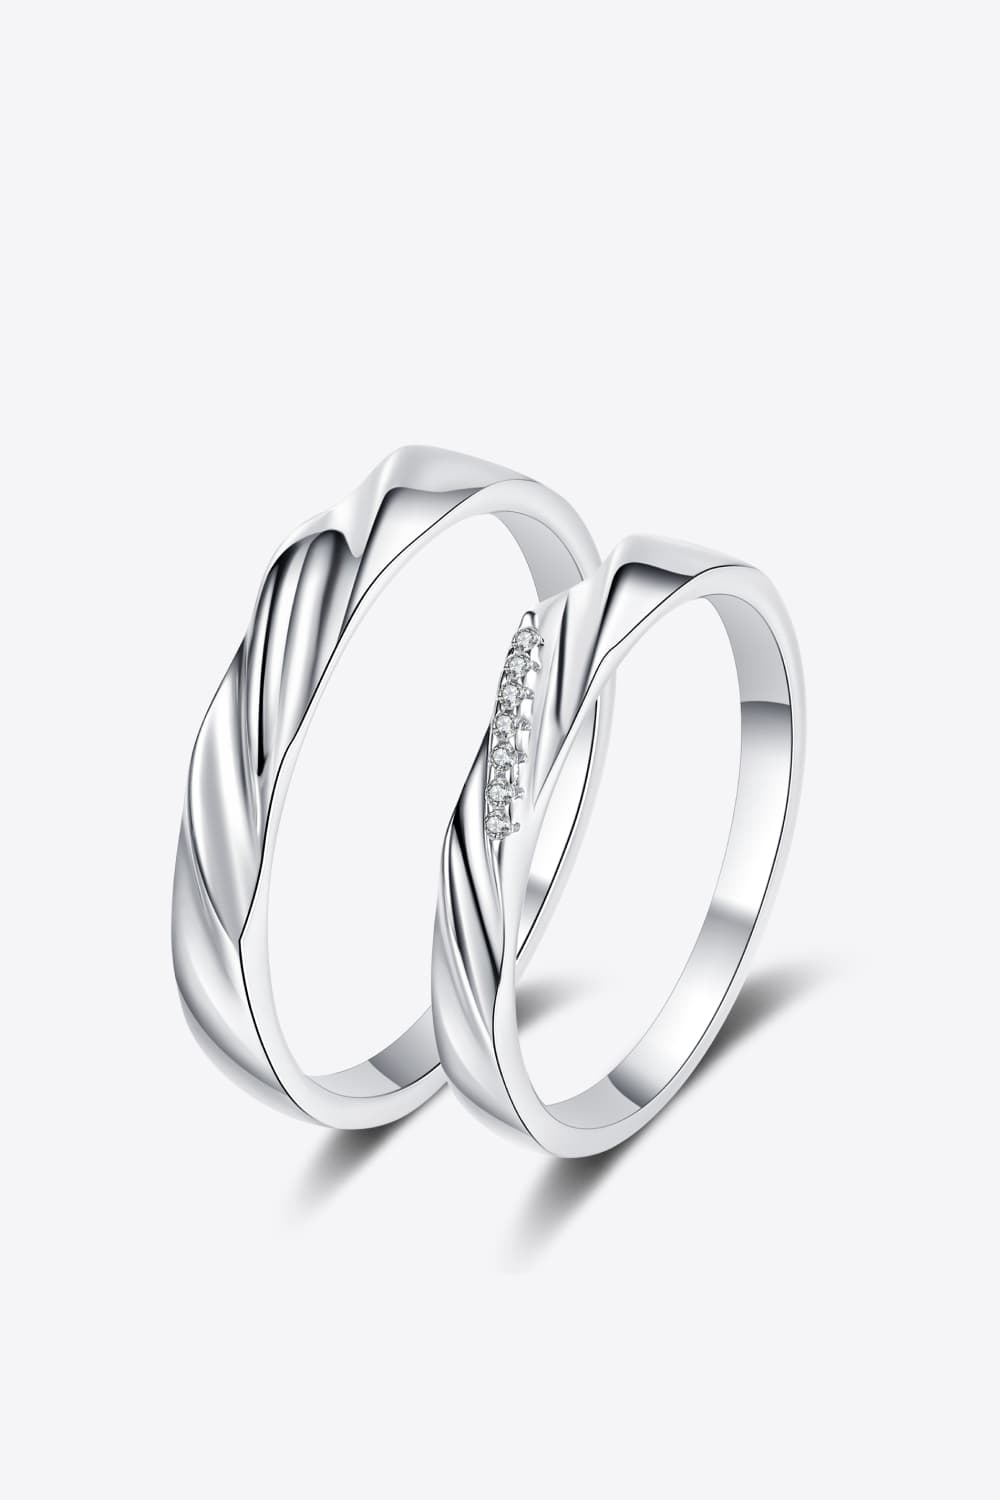 Minimalist 925 Sterling Silver Rhodium-Plated Ring - Sizes 7-11 Ti Amo I love you